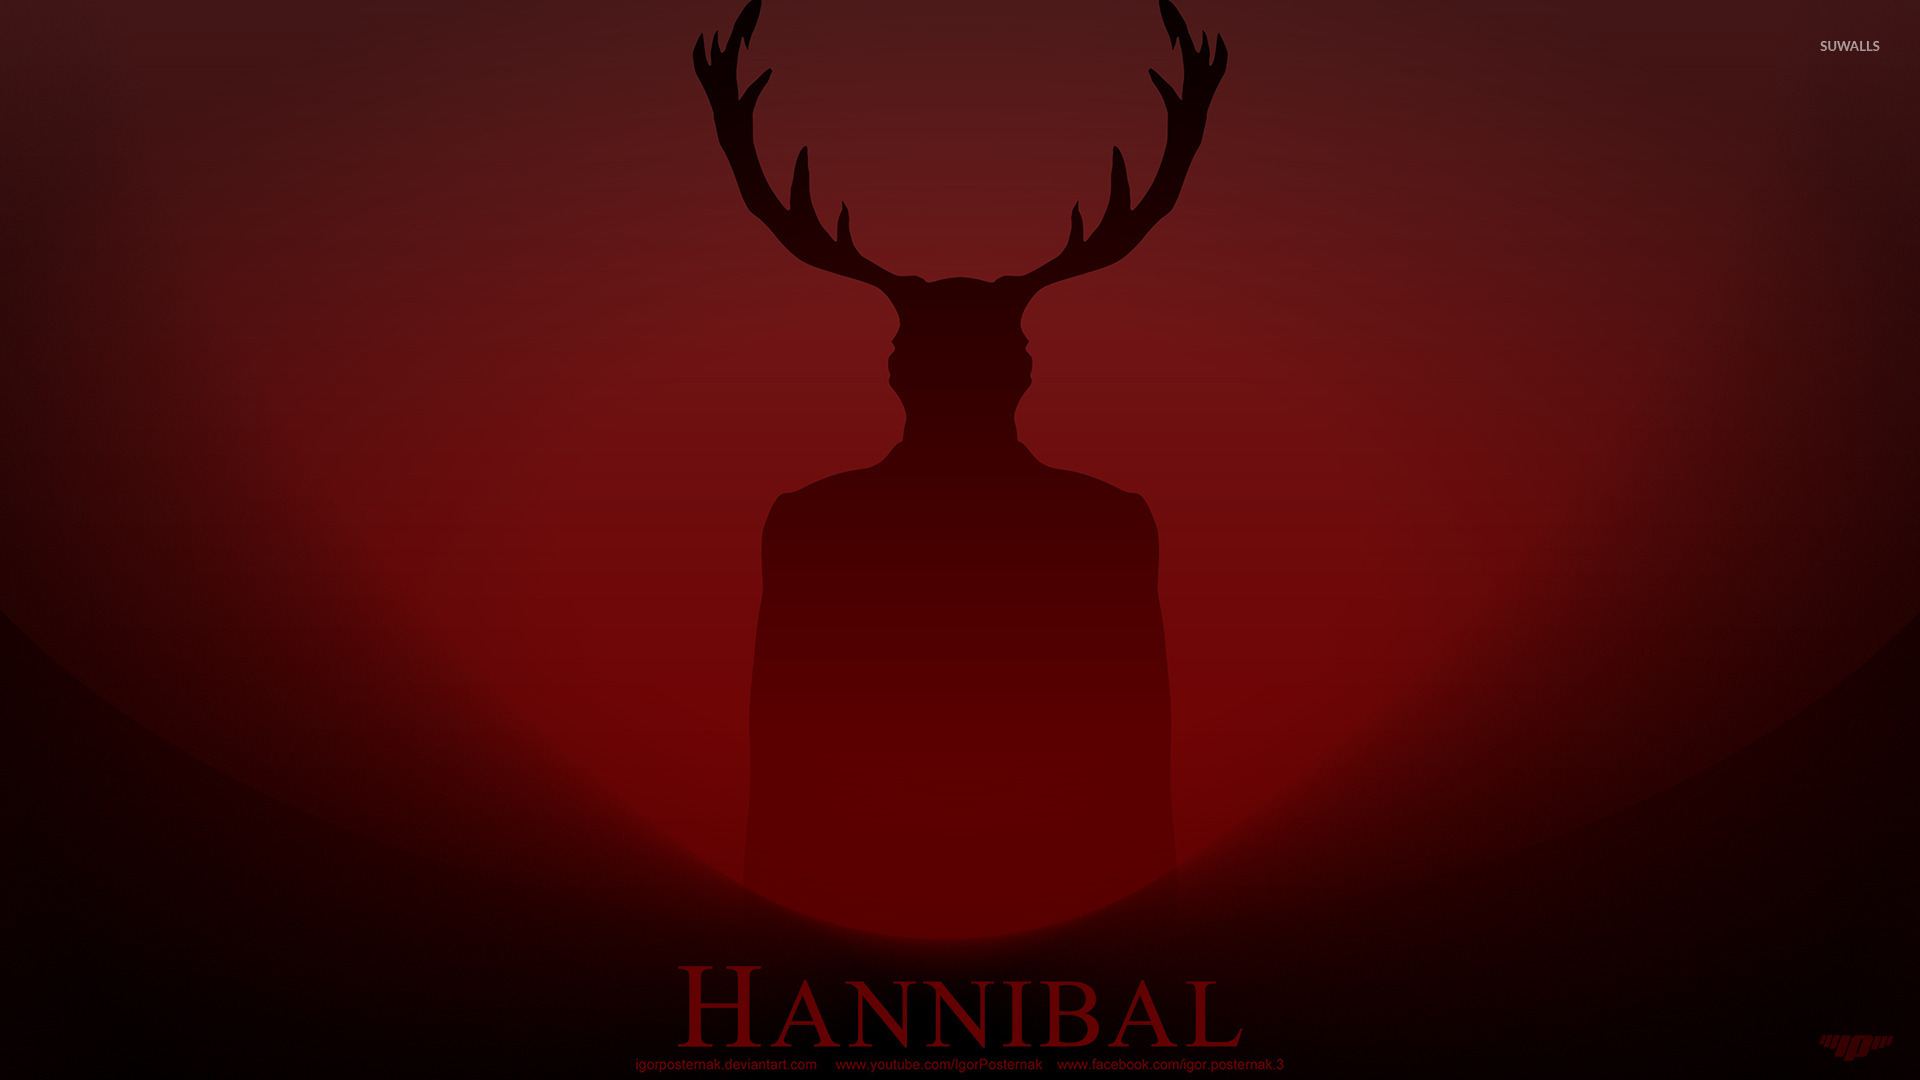 iPhone wallpaper Really cool gif of Hannibal disappearing into the dark  would be a really cool wall paper but doesnt work for me for some reason  Also not my wall paper credit